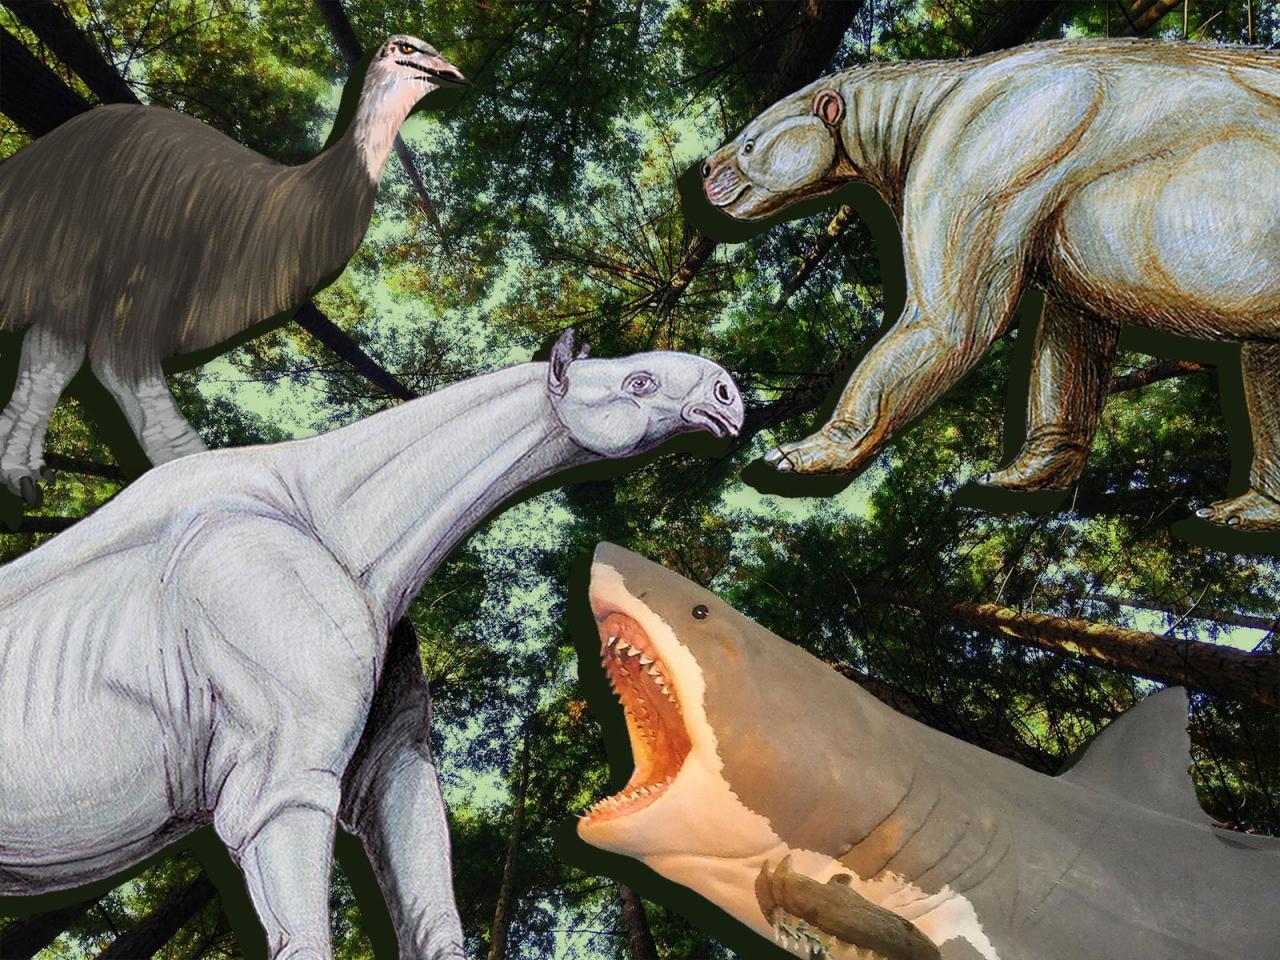 Giant Dinosaurs Appeared at Least 25 Million Years Earlier than Previously Thought